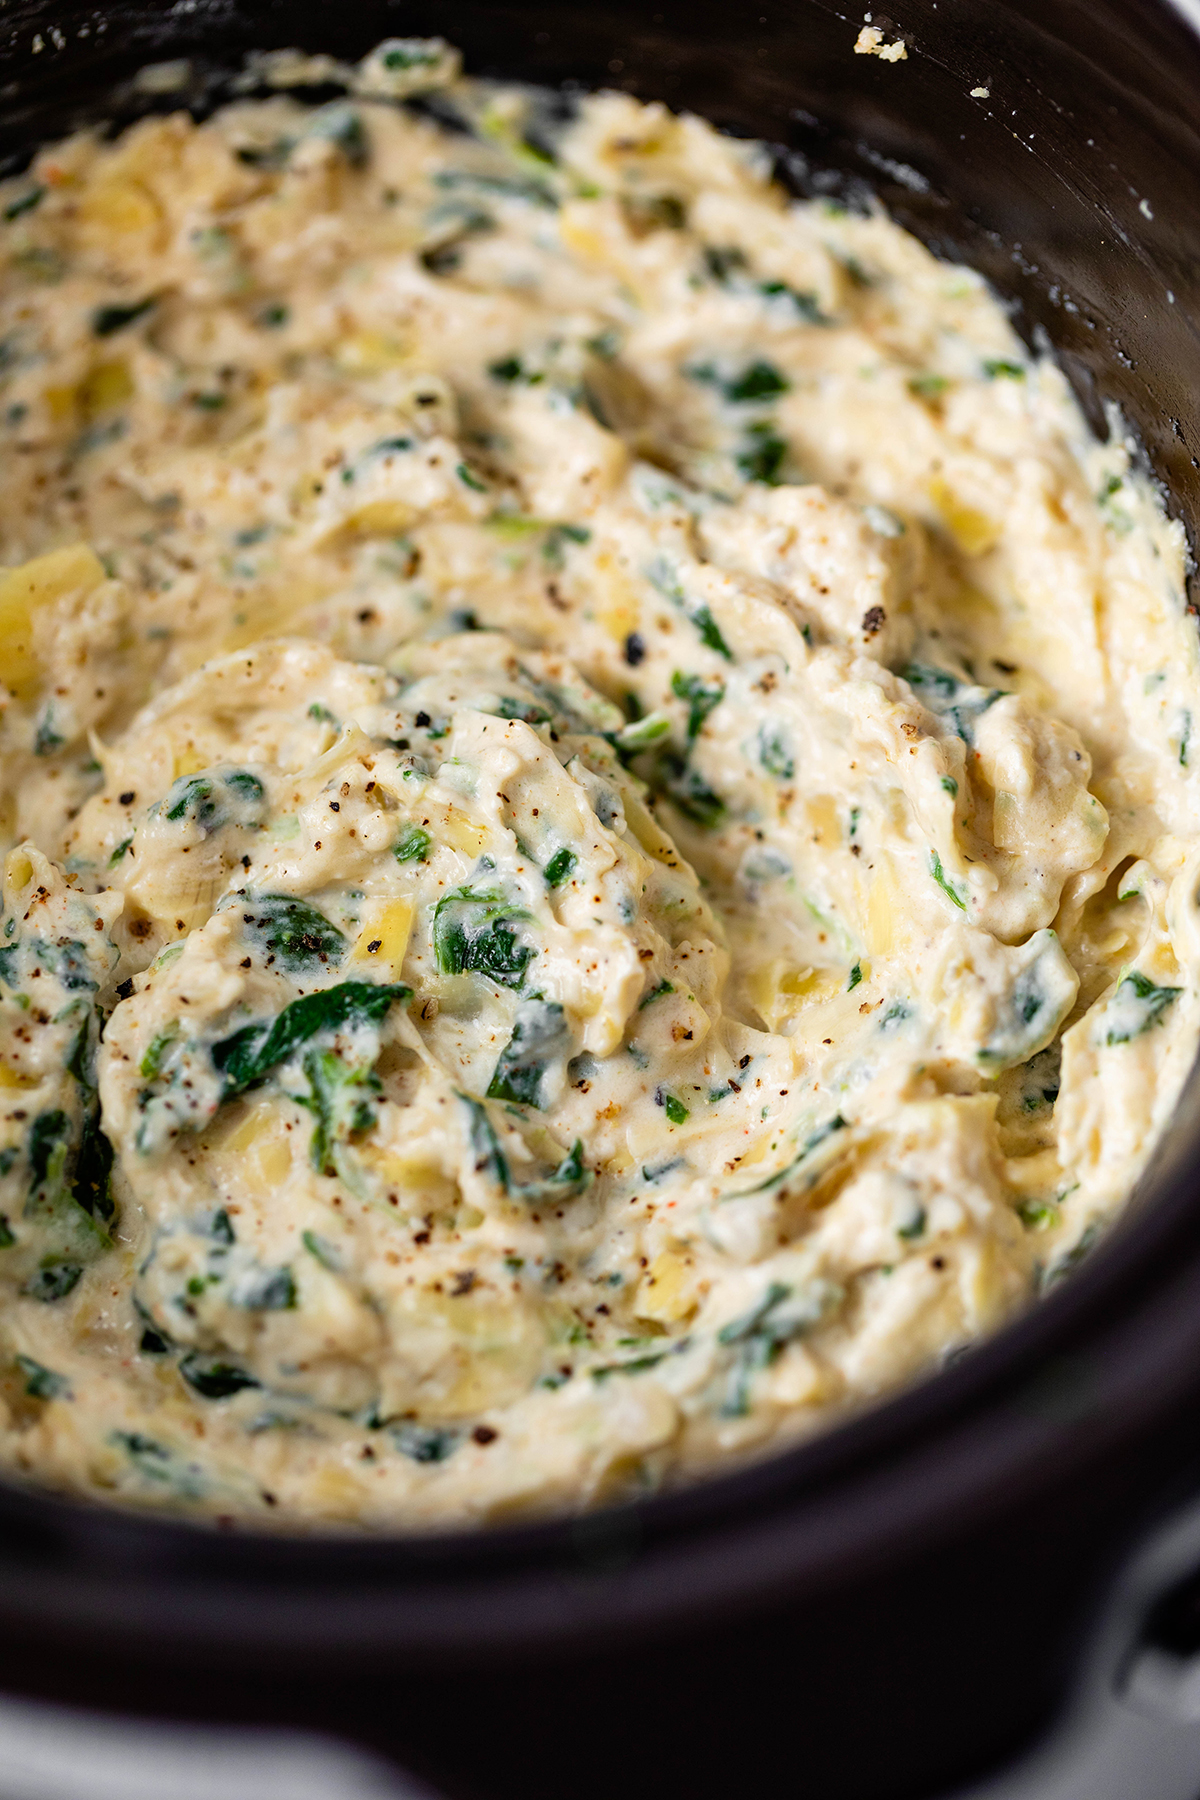 Slow Cooker Spinach Artichoke Dip - Creamy cheesy spinach artichoke dip stays hot and dippable in the slow cooker.